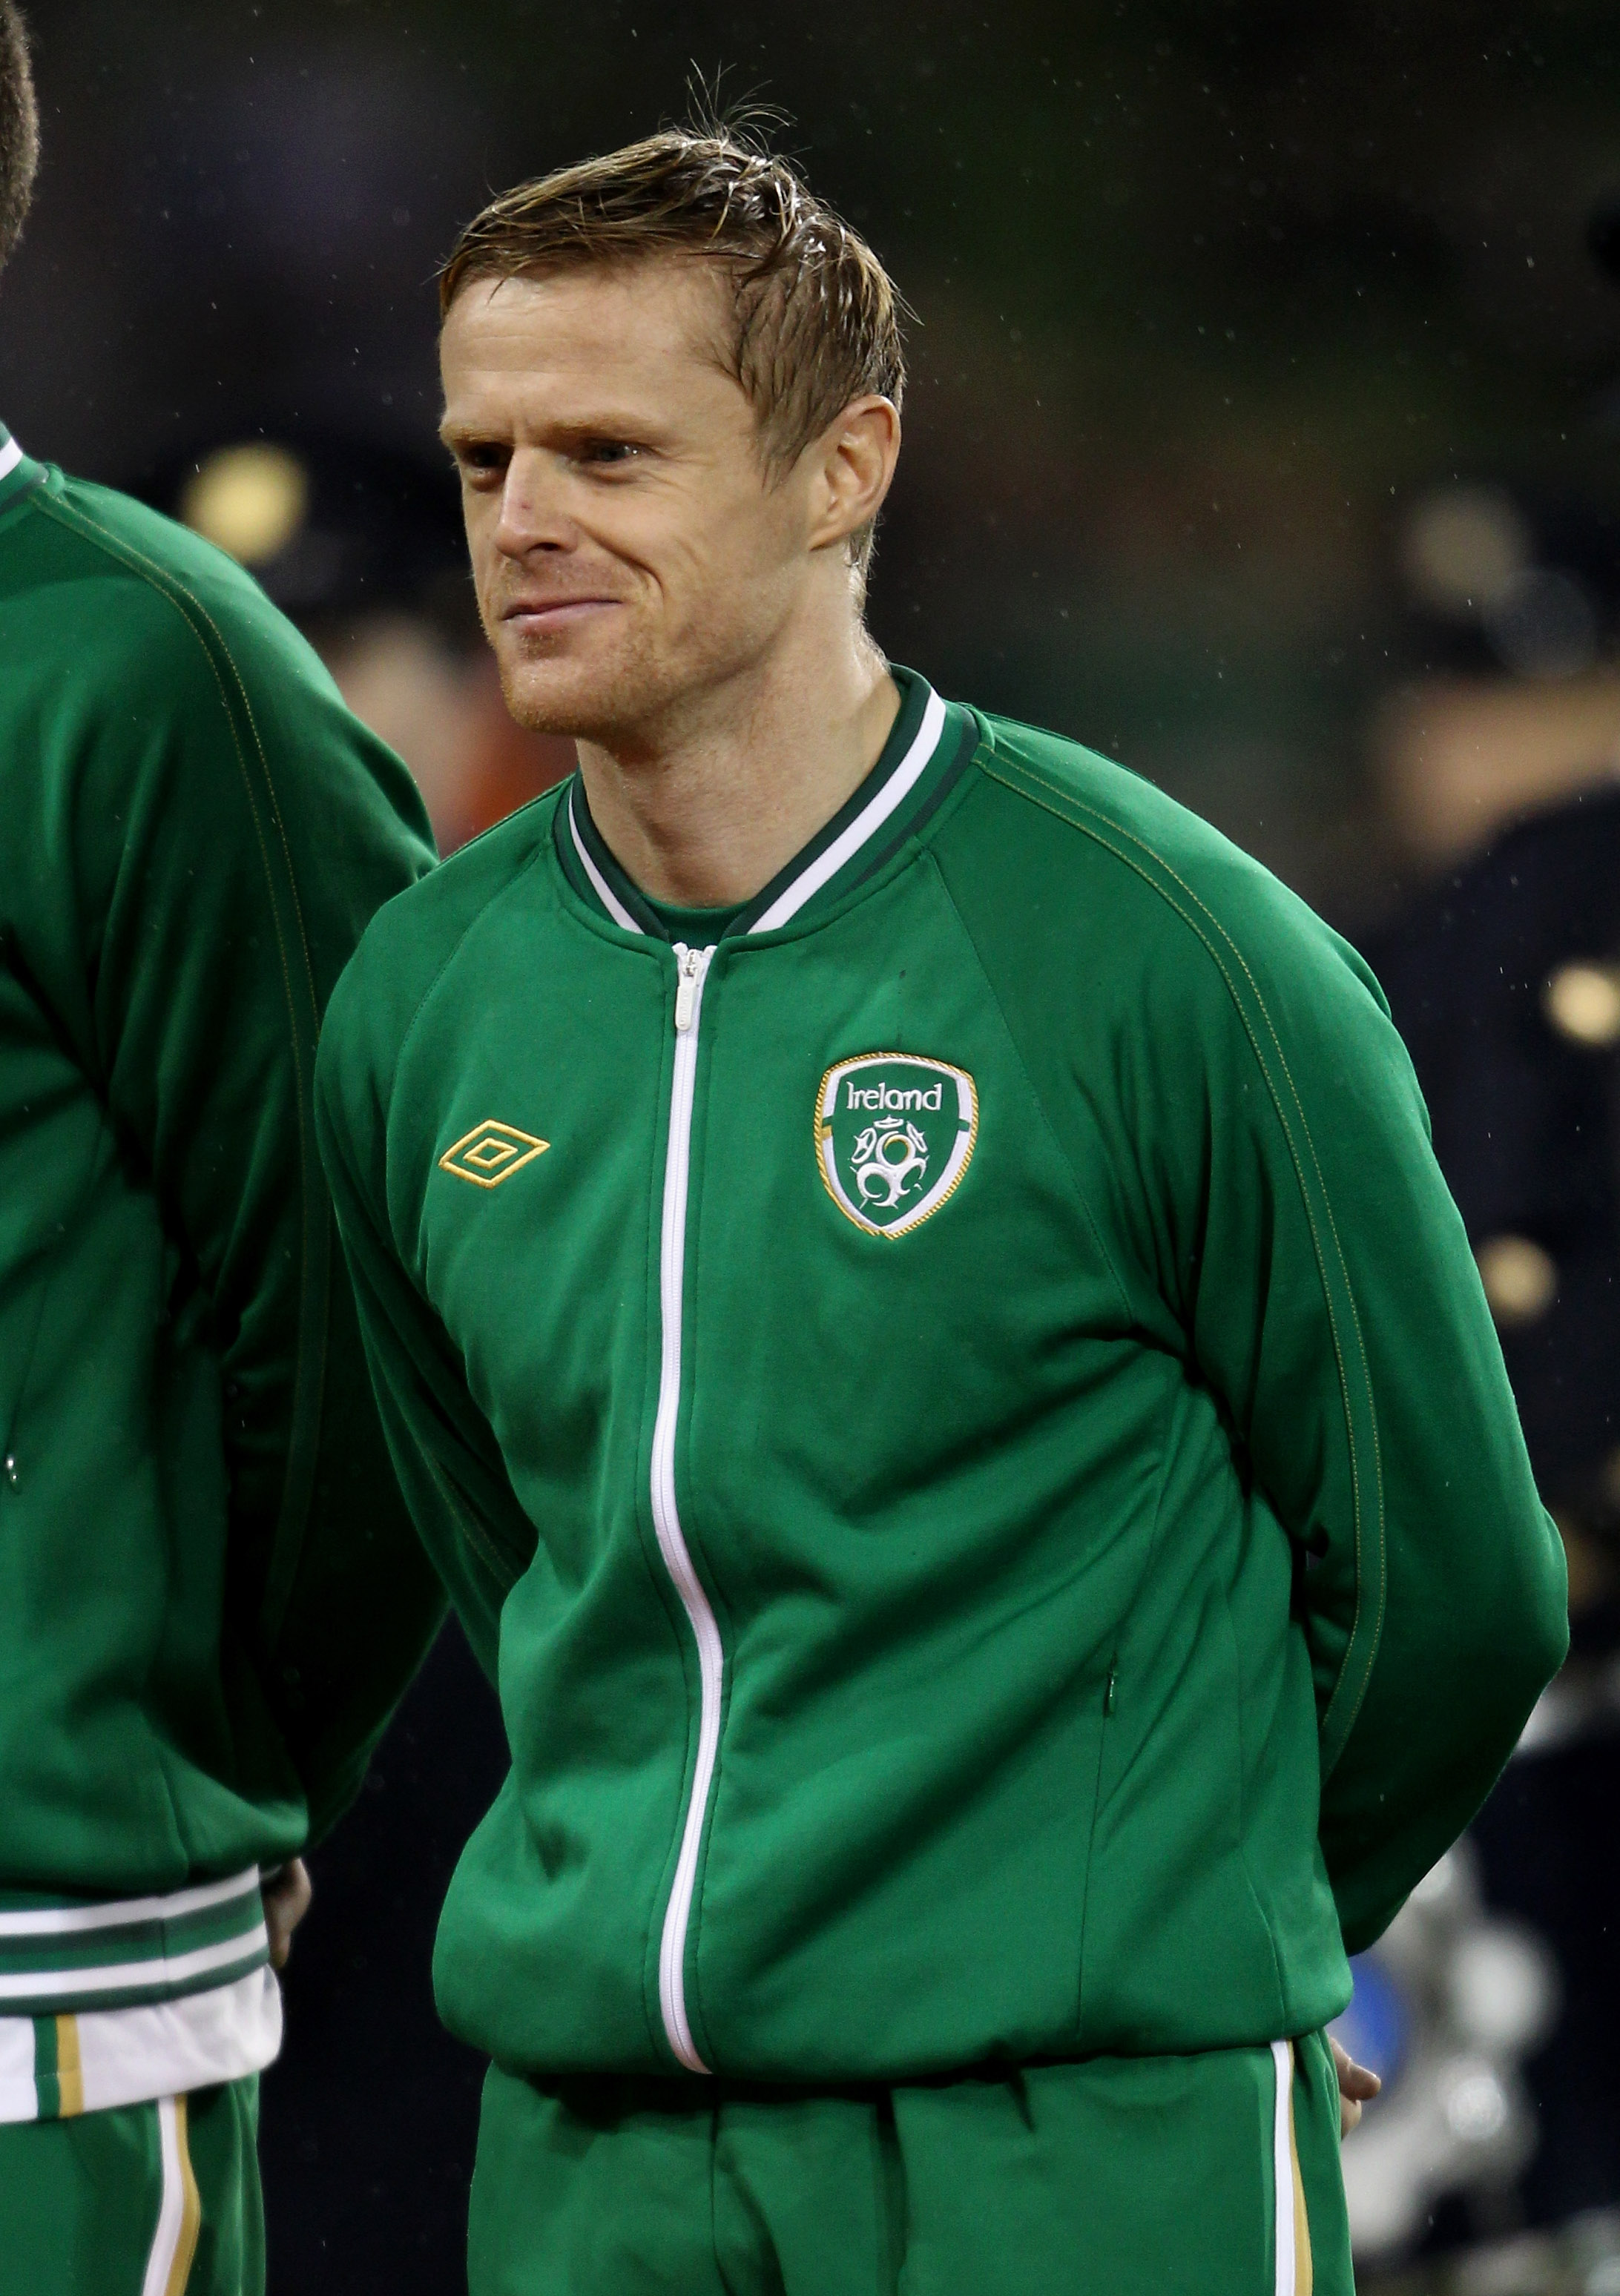 DUBLIN, IRELAND - FEBRUARY 08:  Damien Duff of Ireland during the Carling Nations Cup between Republic of Ireland and Wales at Aviva Stadium on February 8, 2011 in Dublin, Ireland.  (Photo by Scott Heavey/Getty Images)